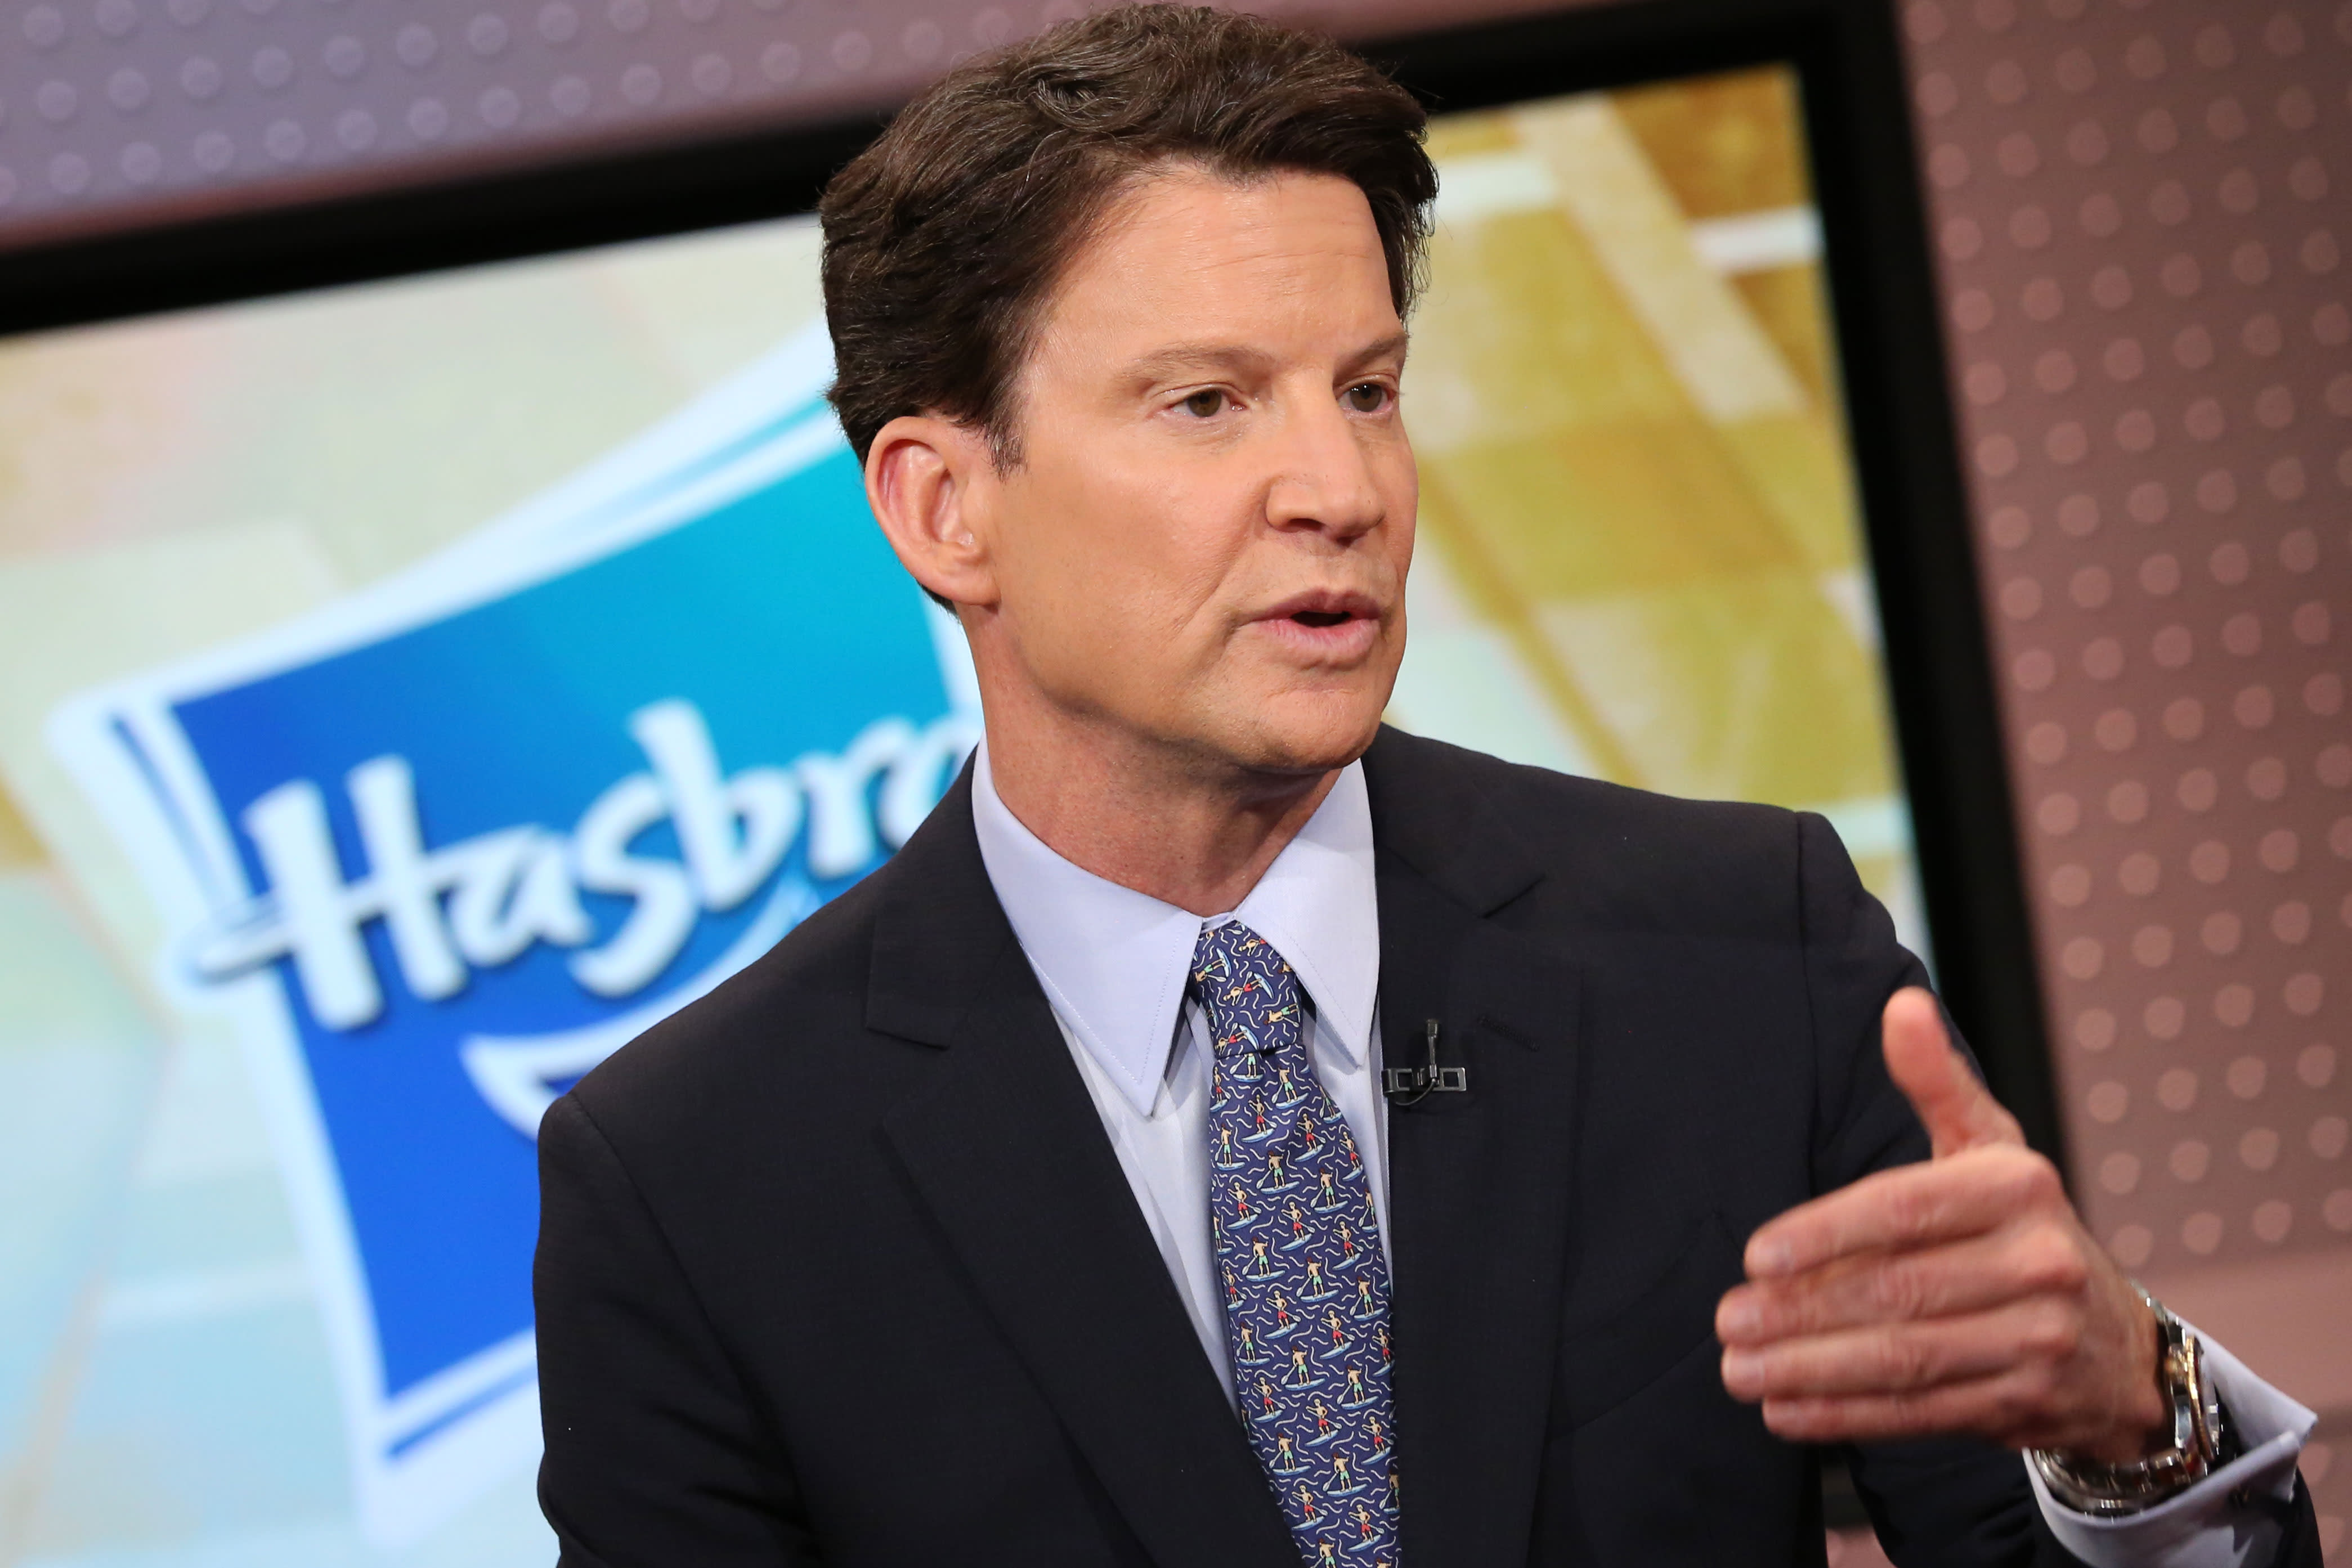 Hasbro CEO Brian Goldner dies, days after stepping down for health reasons